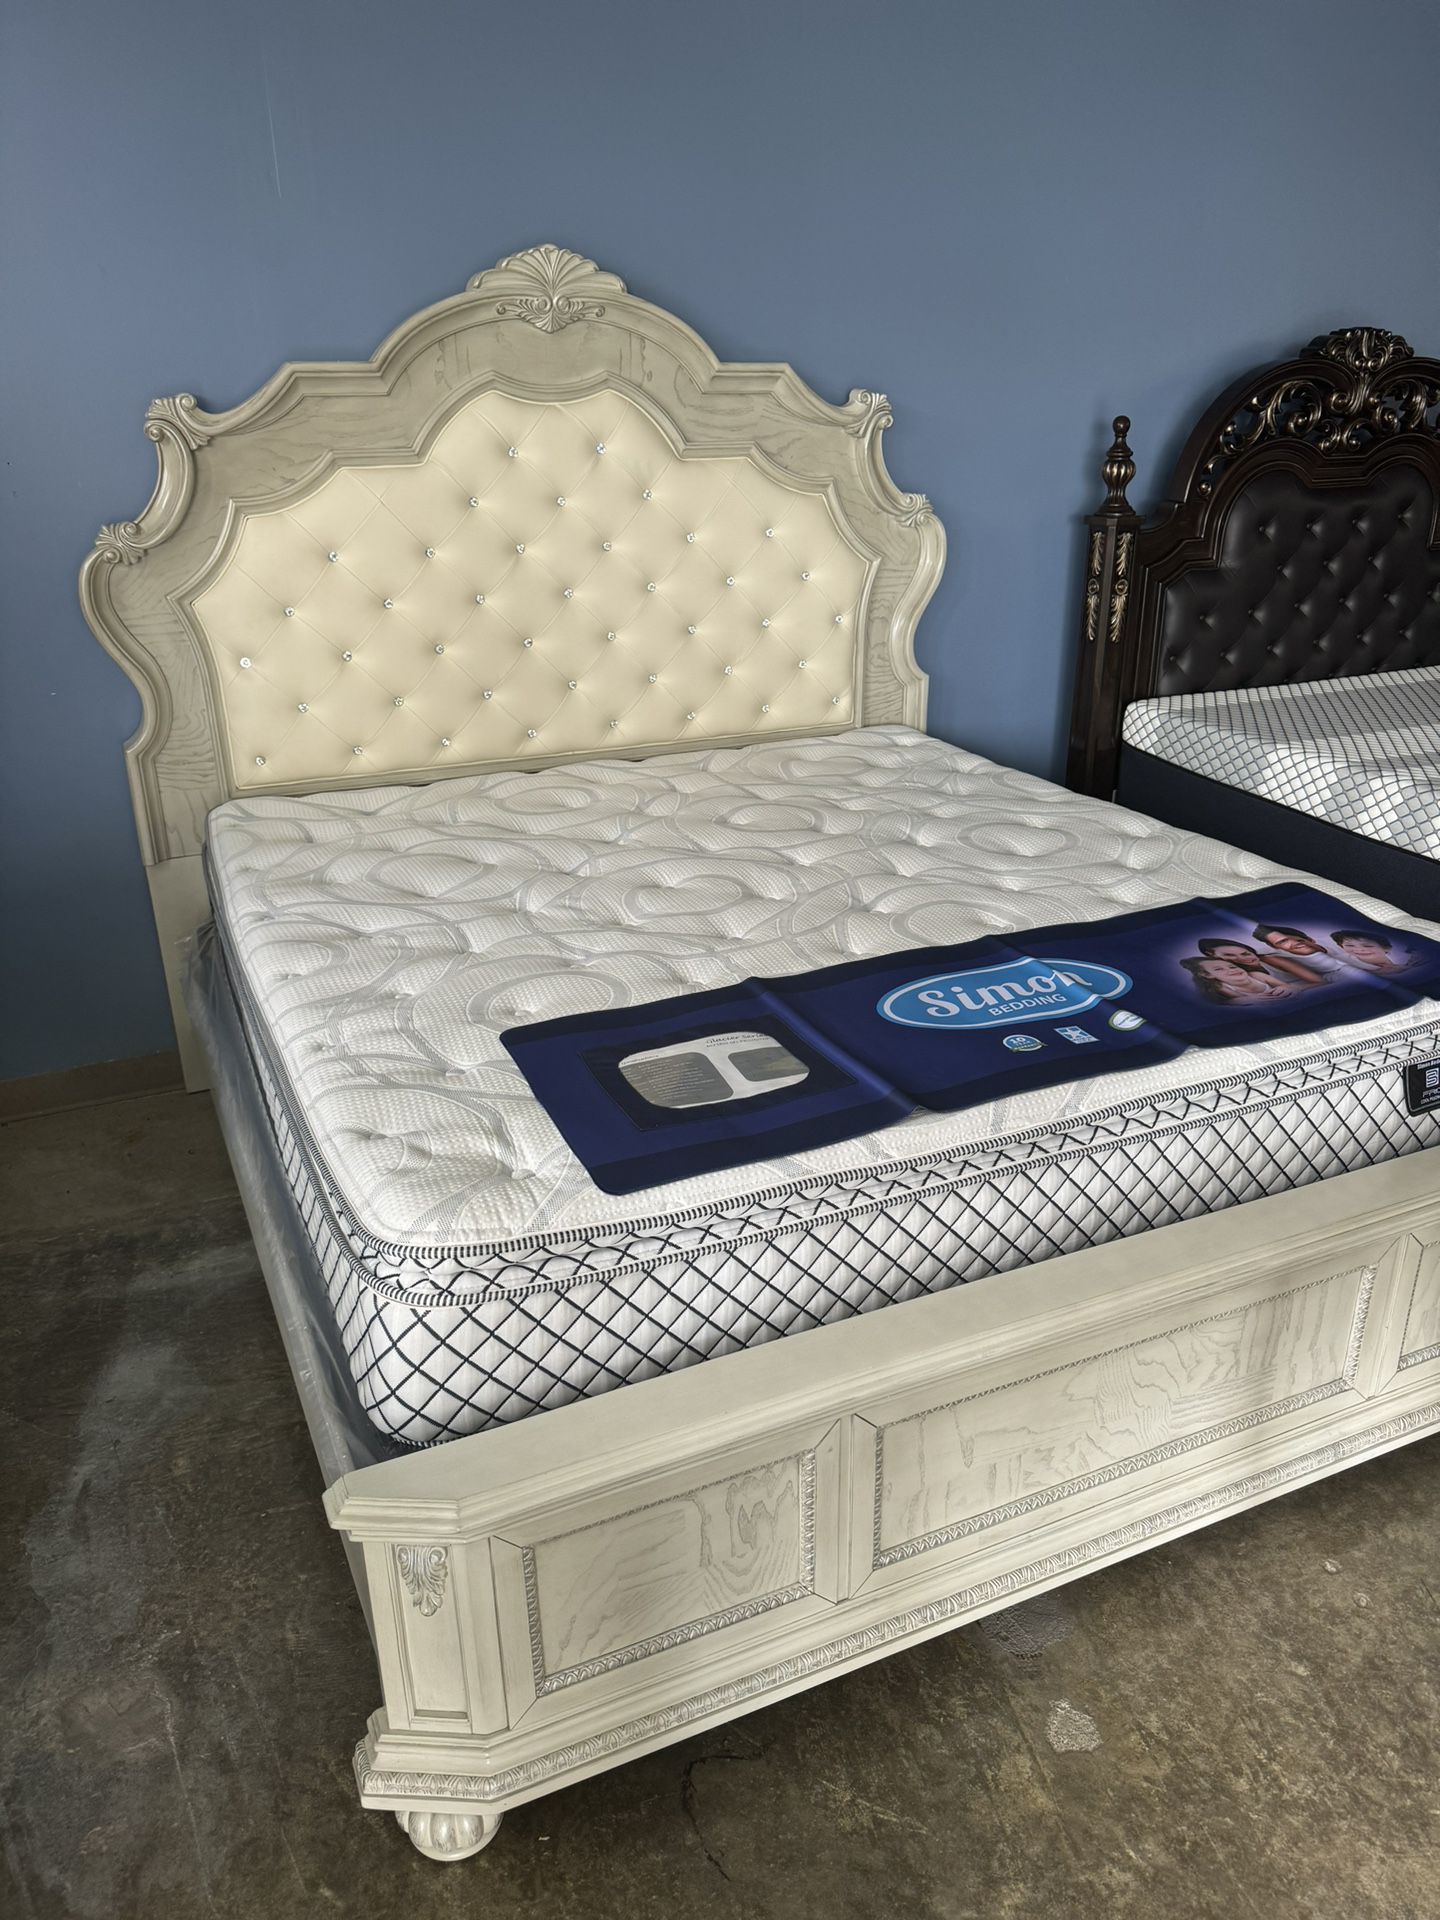 New King Bed For $999